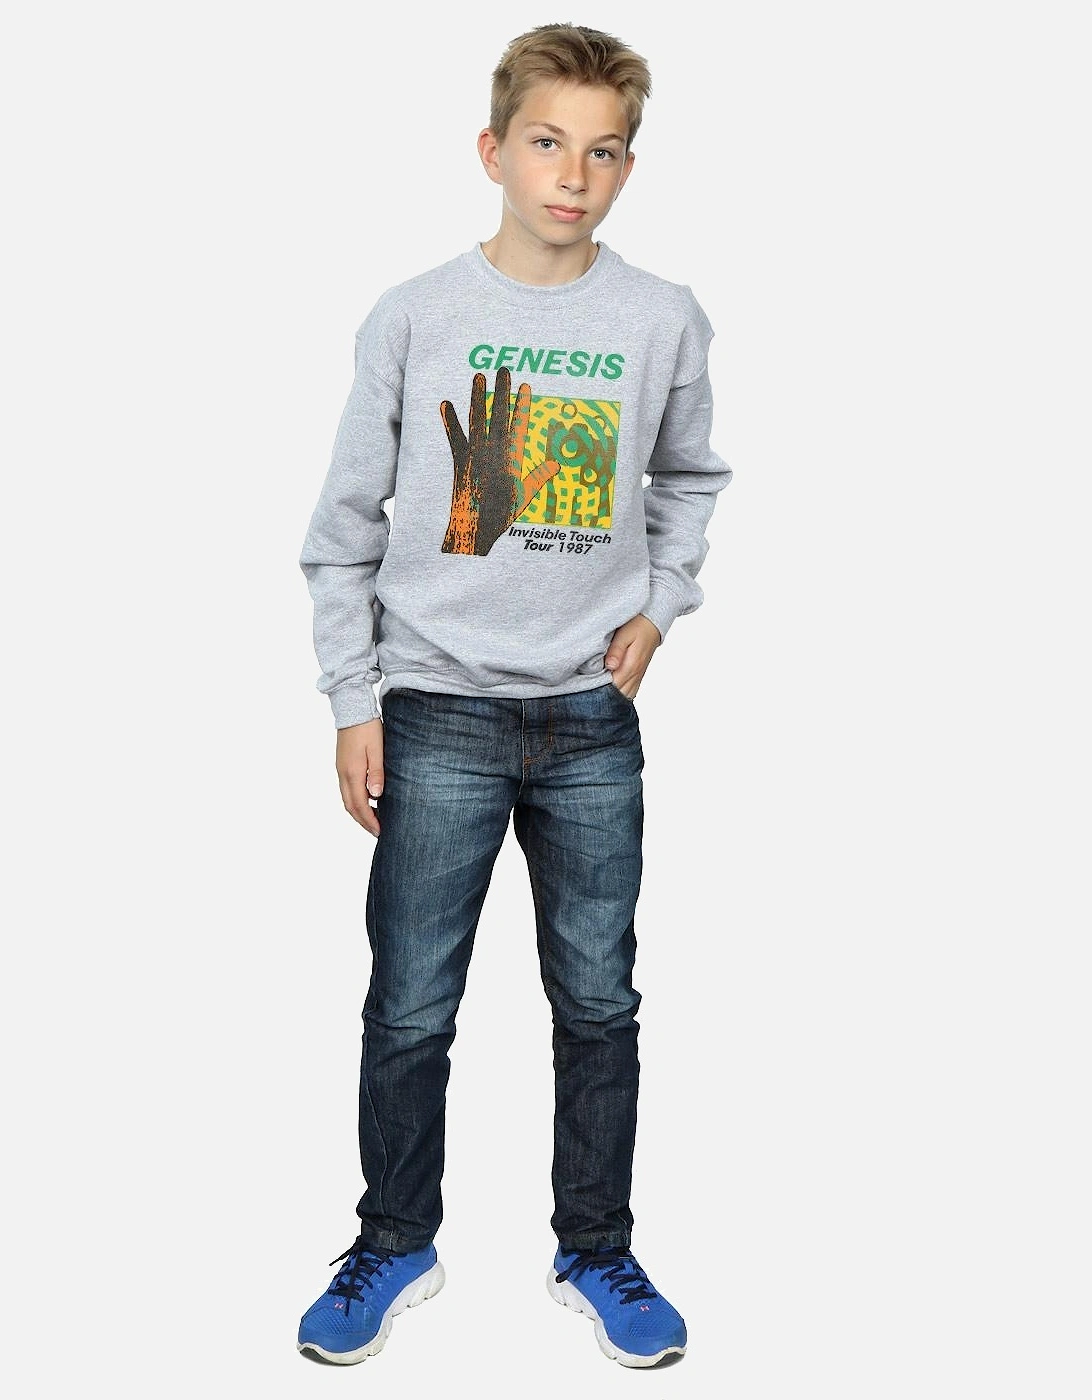 Boys Invisible Touch Tour Sweatshirt